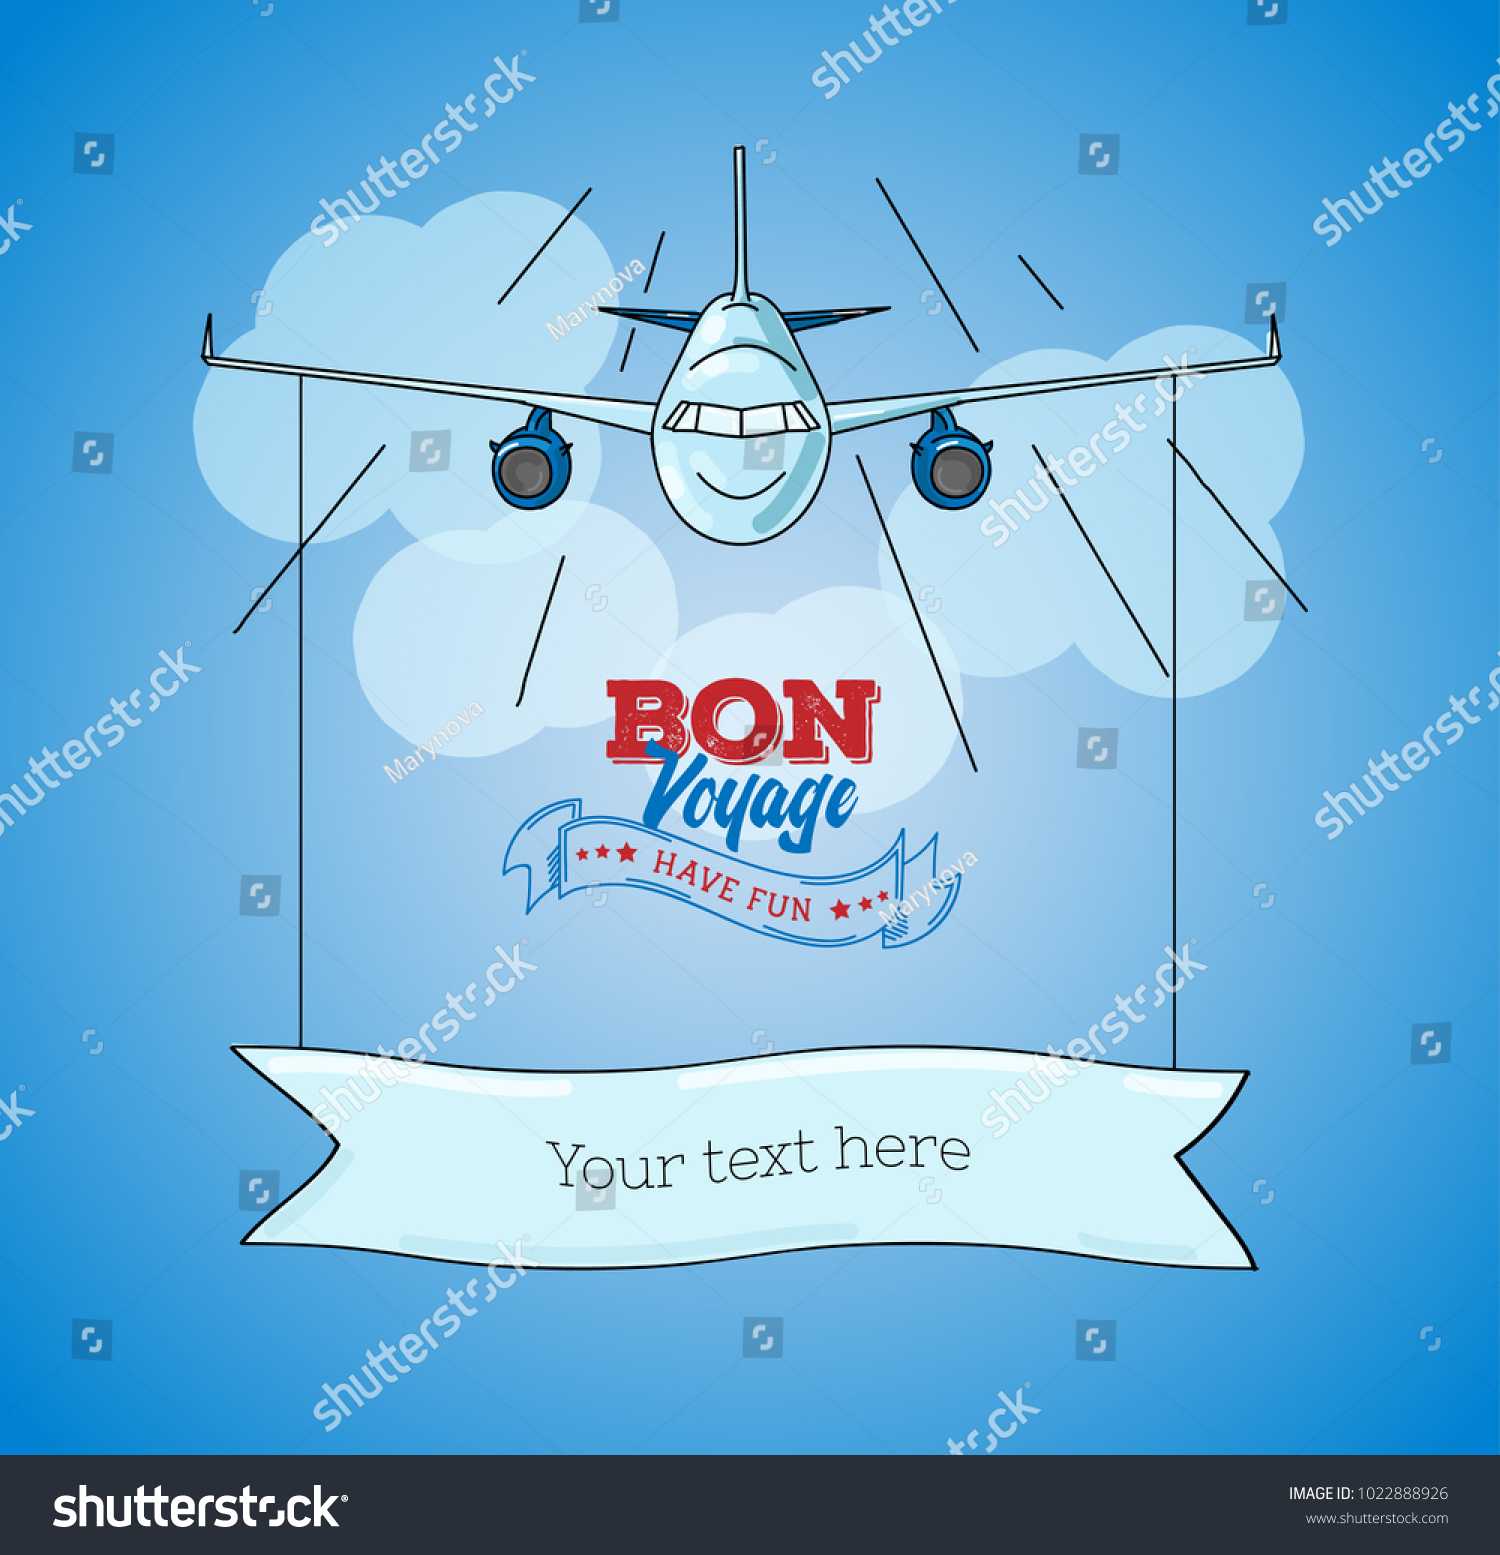 Bon Voyage Card Images, Stock Photos & Vectors | Shutterstock Within Bon Voyage Card Template